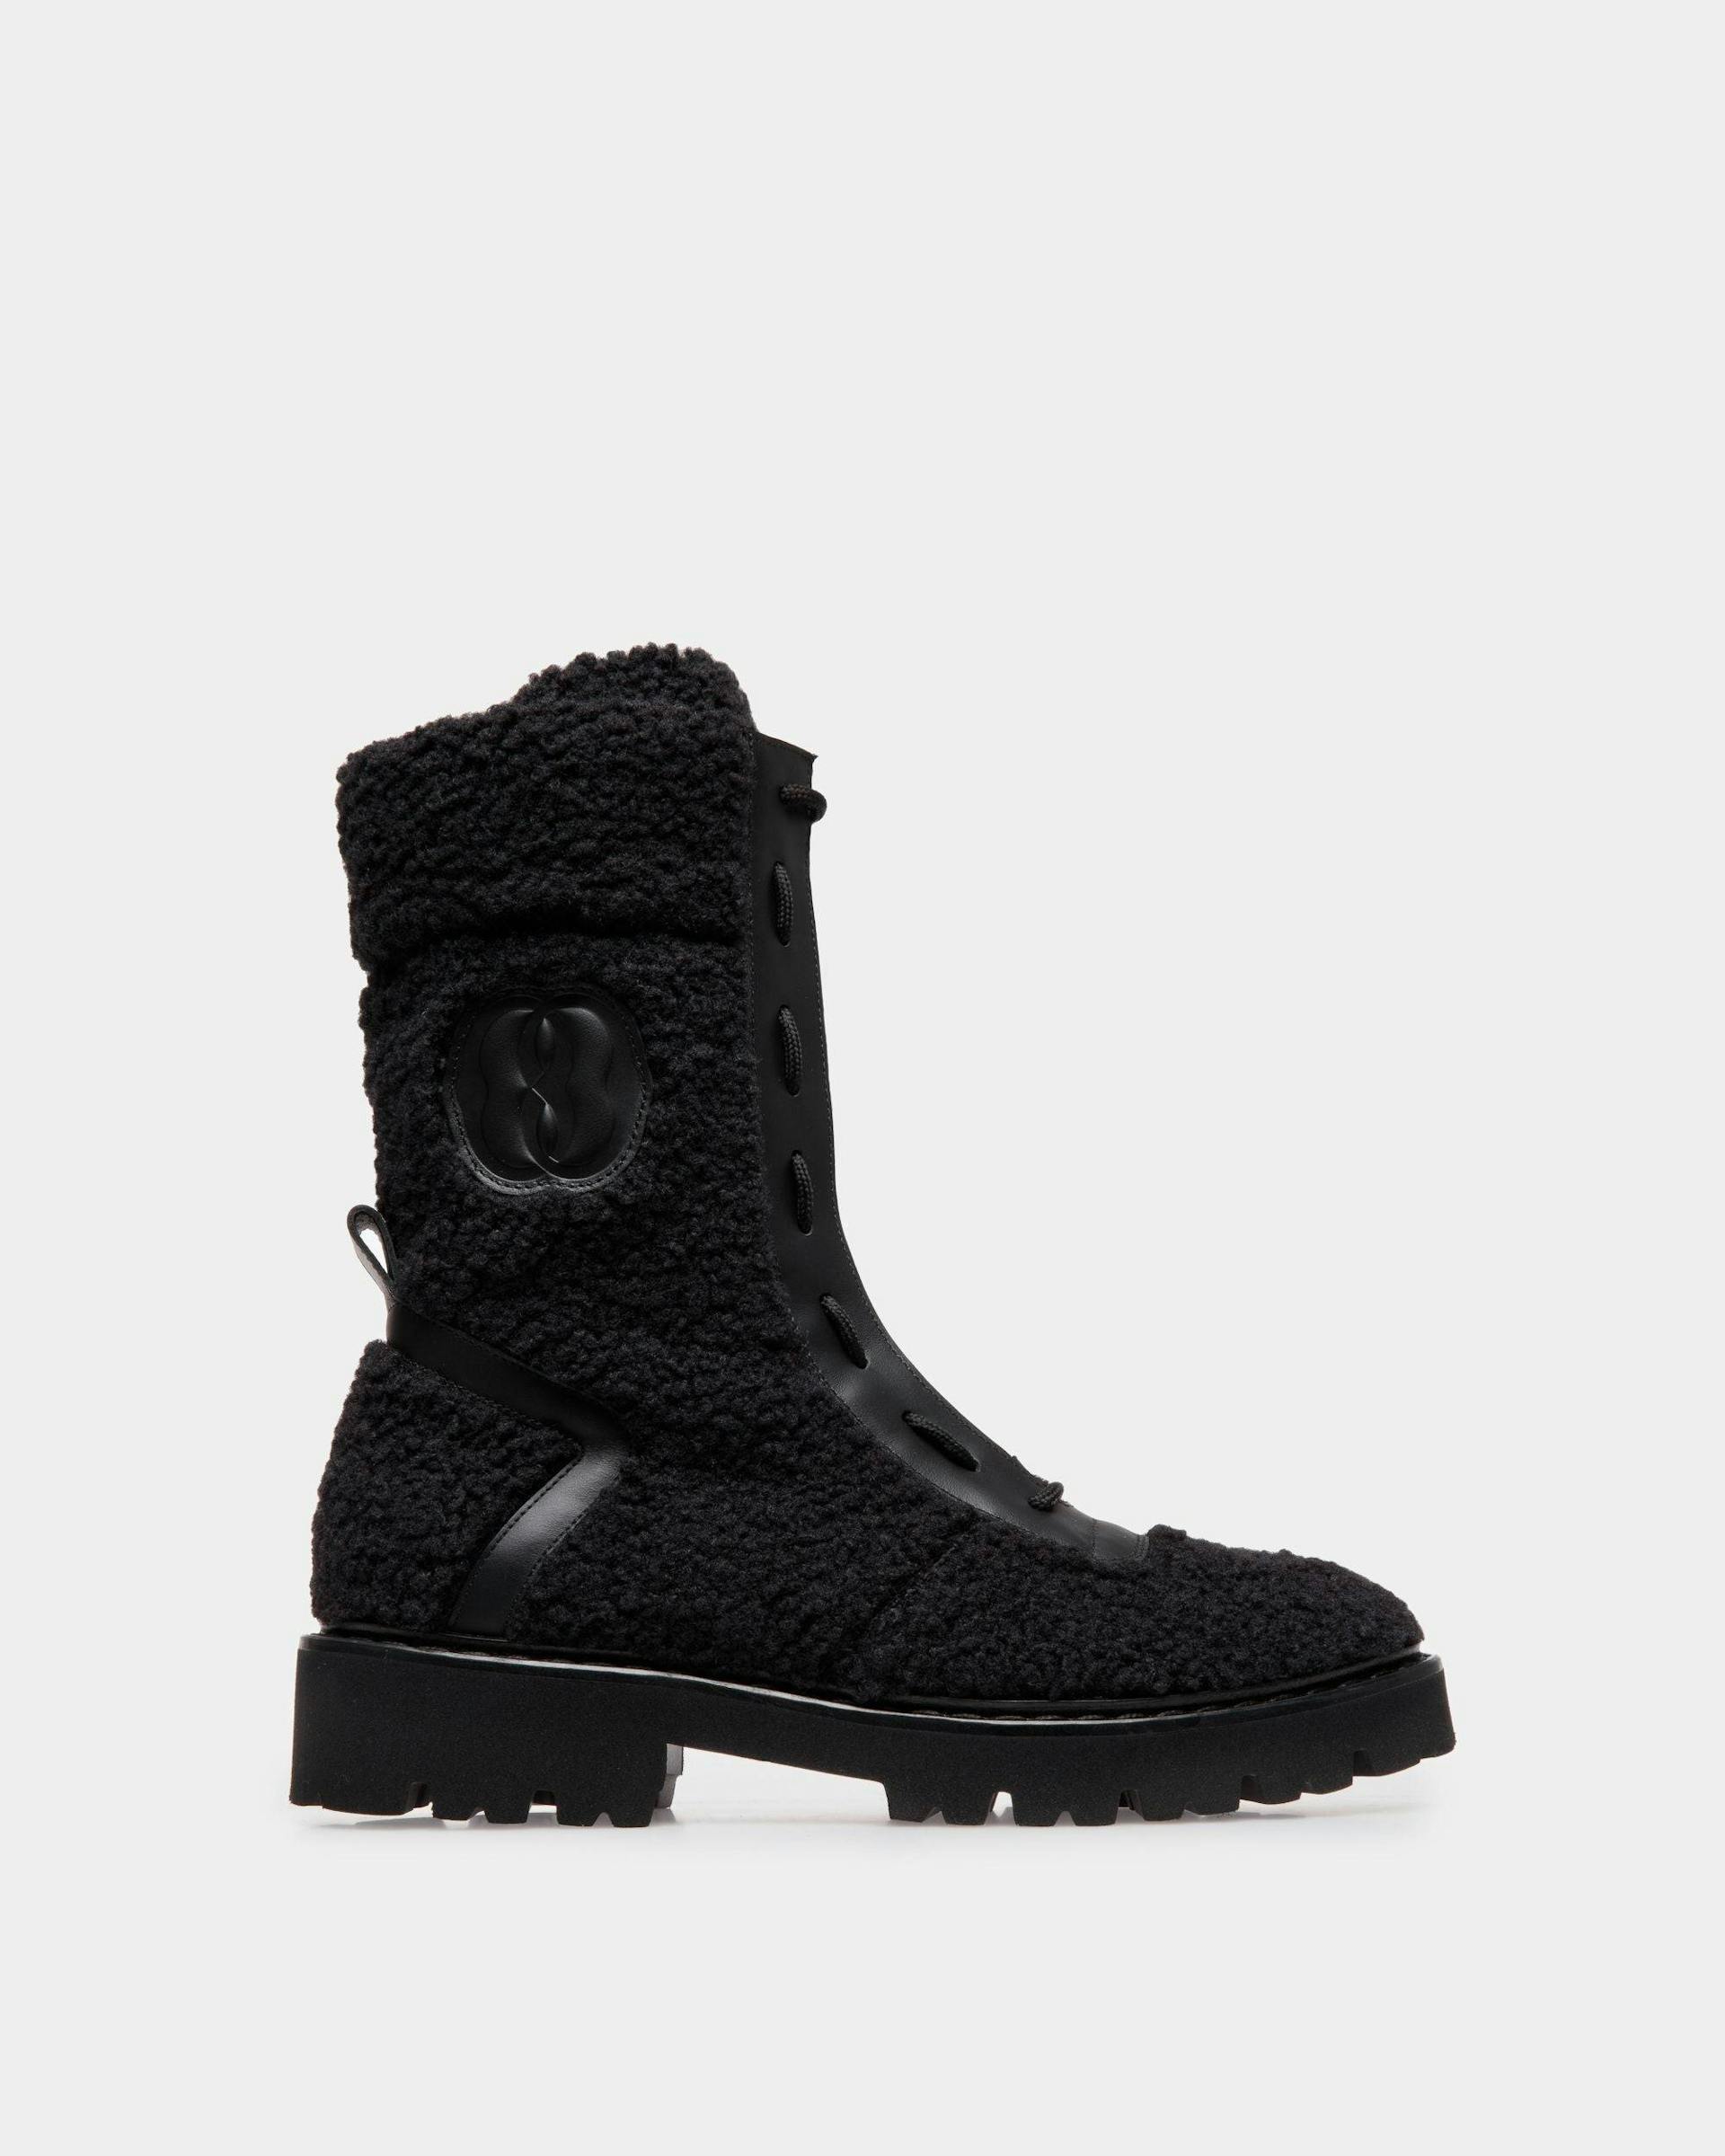 Women's Enga Boots In Black Leather | Bally | Still Life Side